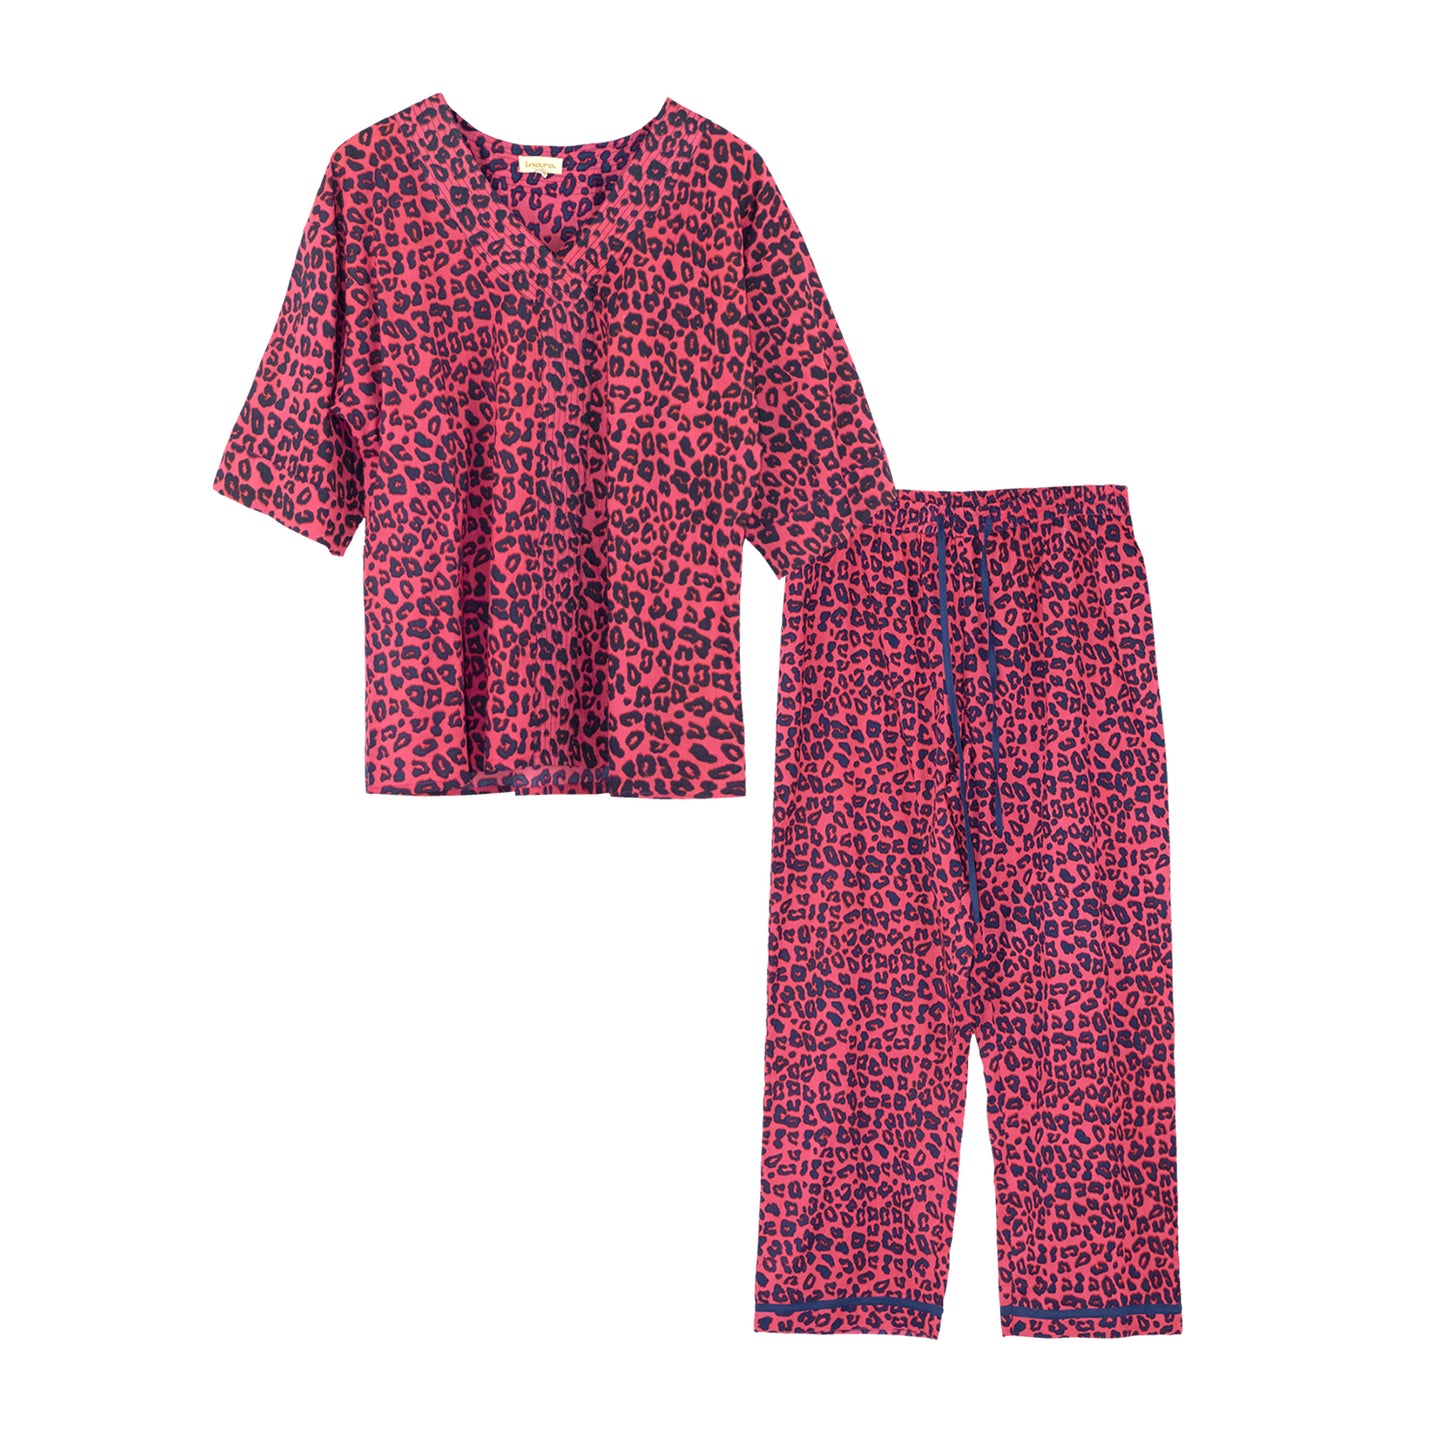 Pink Panther PJ Set (Printed Relaxed Top + Bottoms)